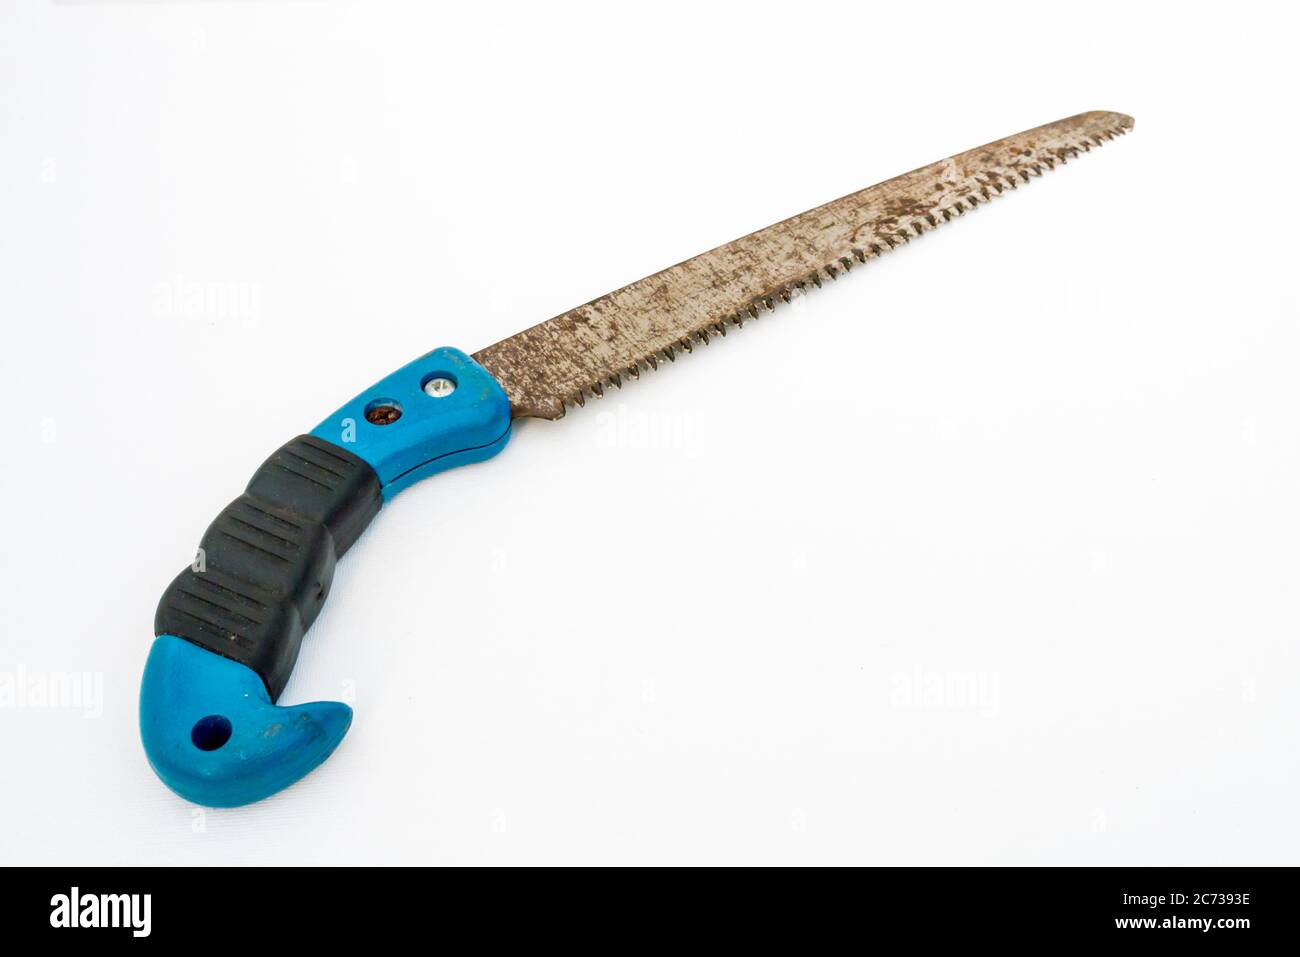 A Studio Photograph of a Garden Pruning Saw Stock Photo